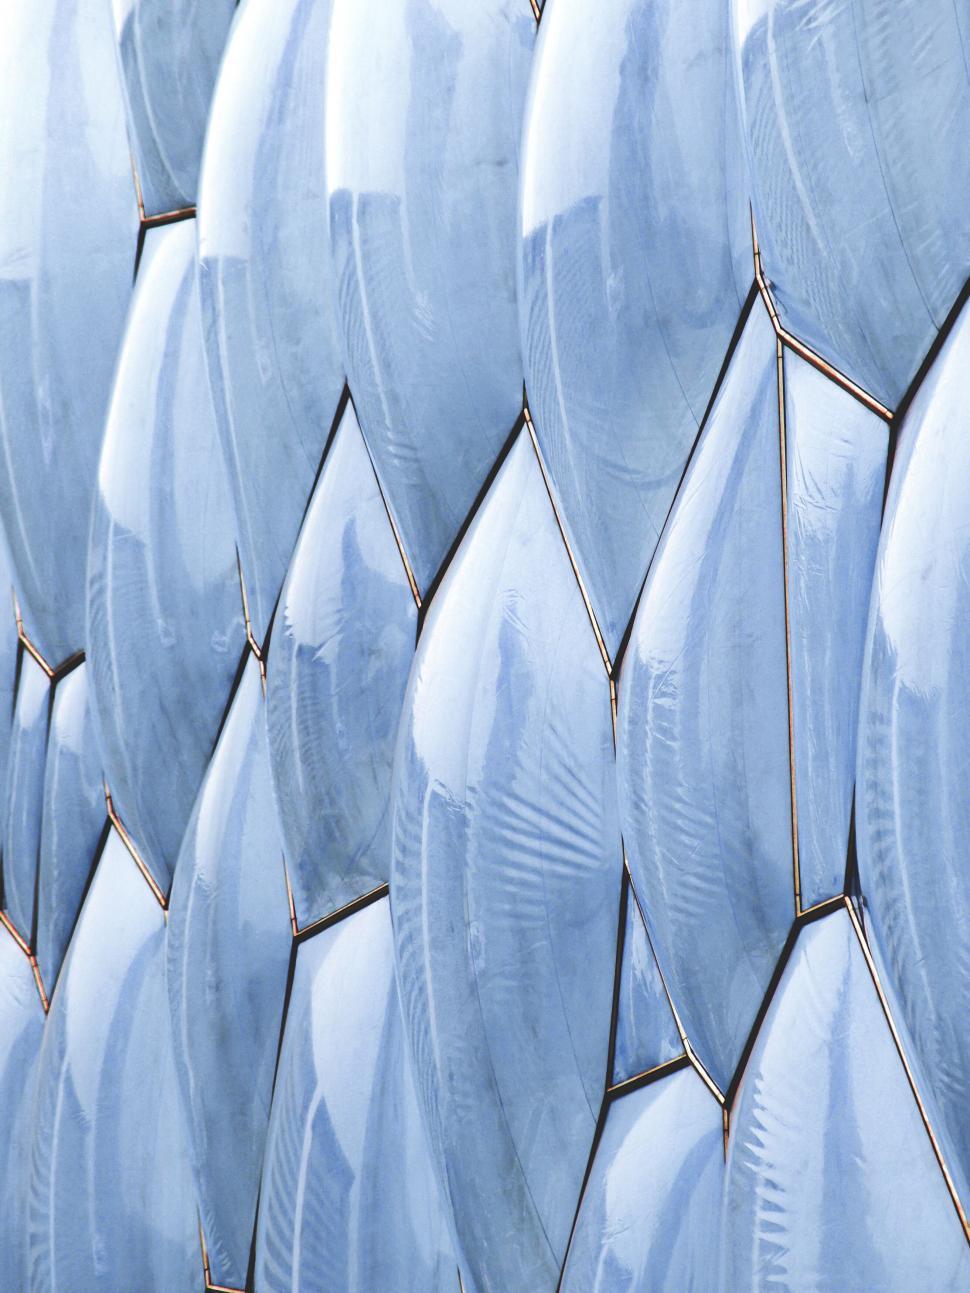 Free Image of Patterned facade of a modern building 